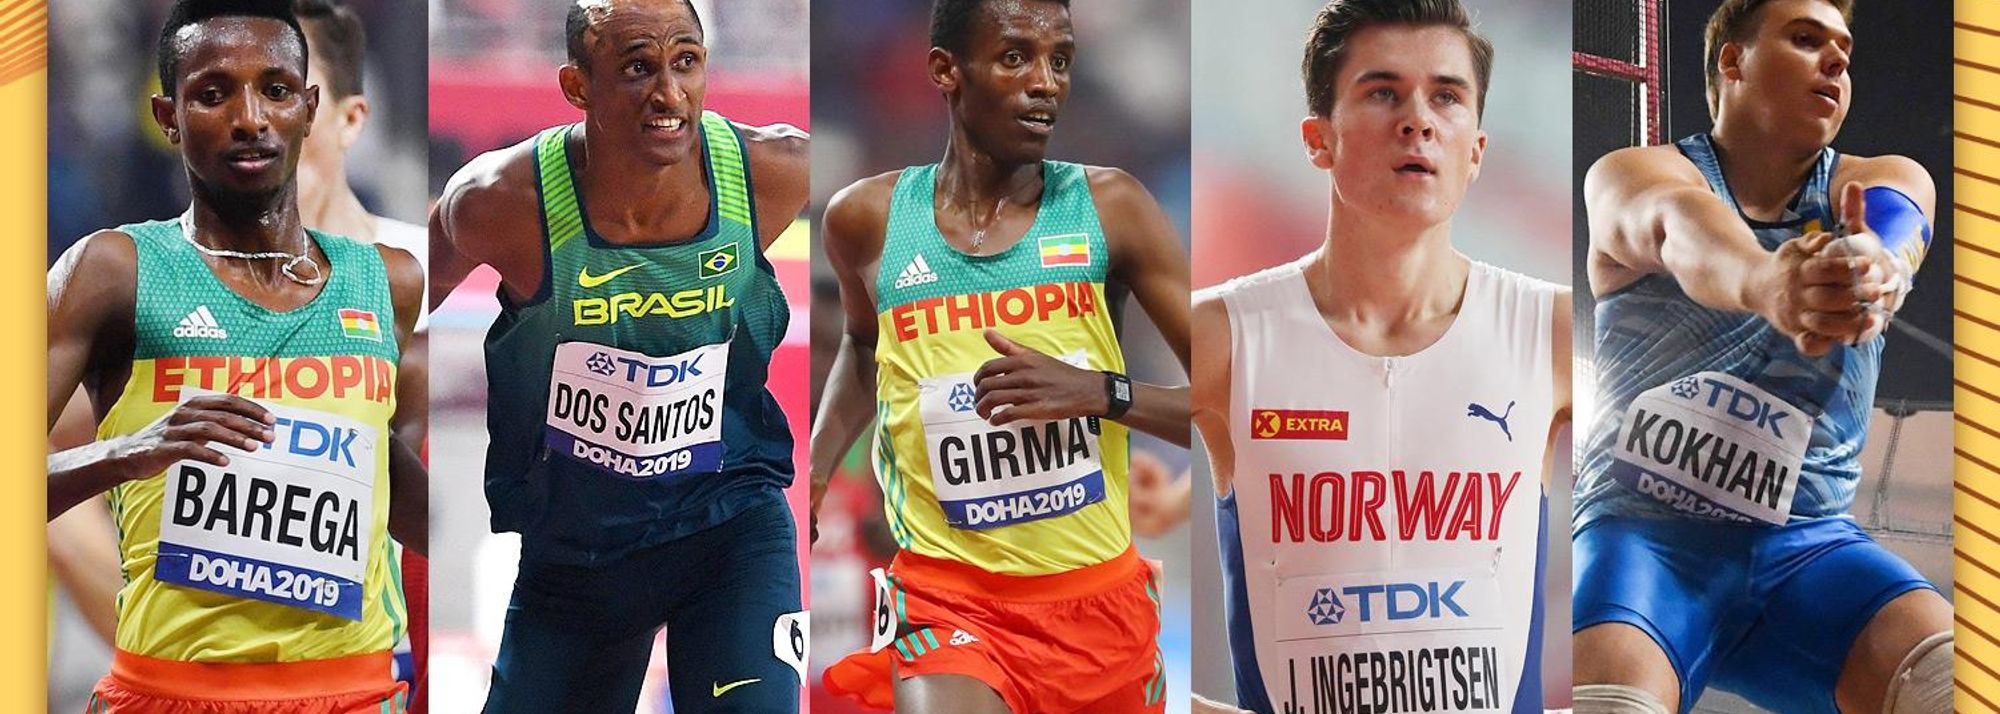 With less than three weeks to go until the World Athletics Awards 2019, the IAAF is delighted to announce the five finalists for the 2019 Male Rising Star Award to recognise this year's best U20 athlete.